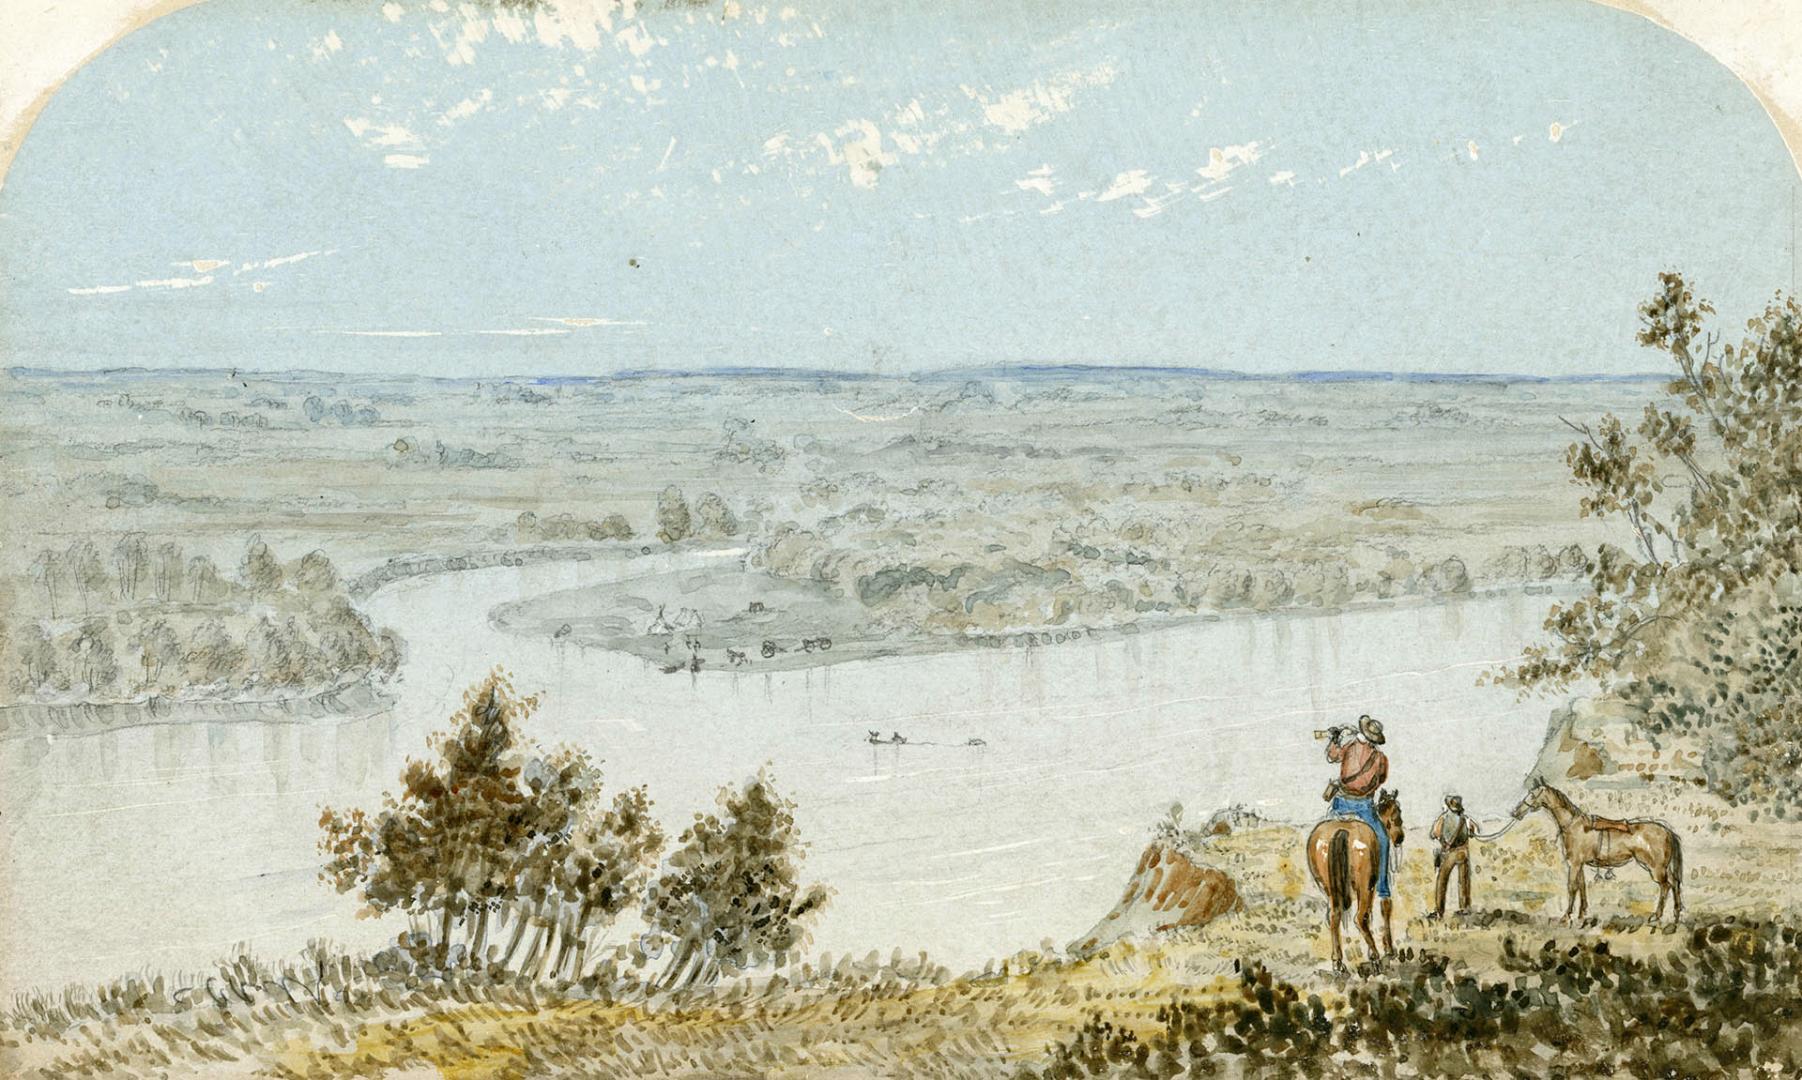 Confluence of the Little Souris and the Assiniboine, Manitoba